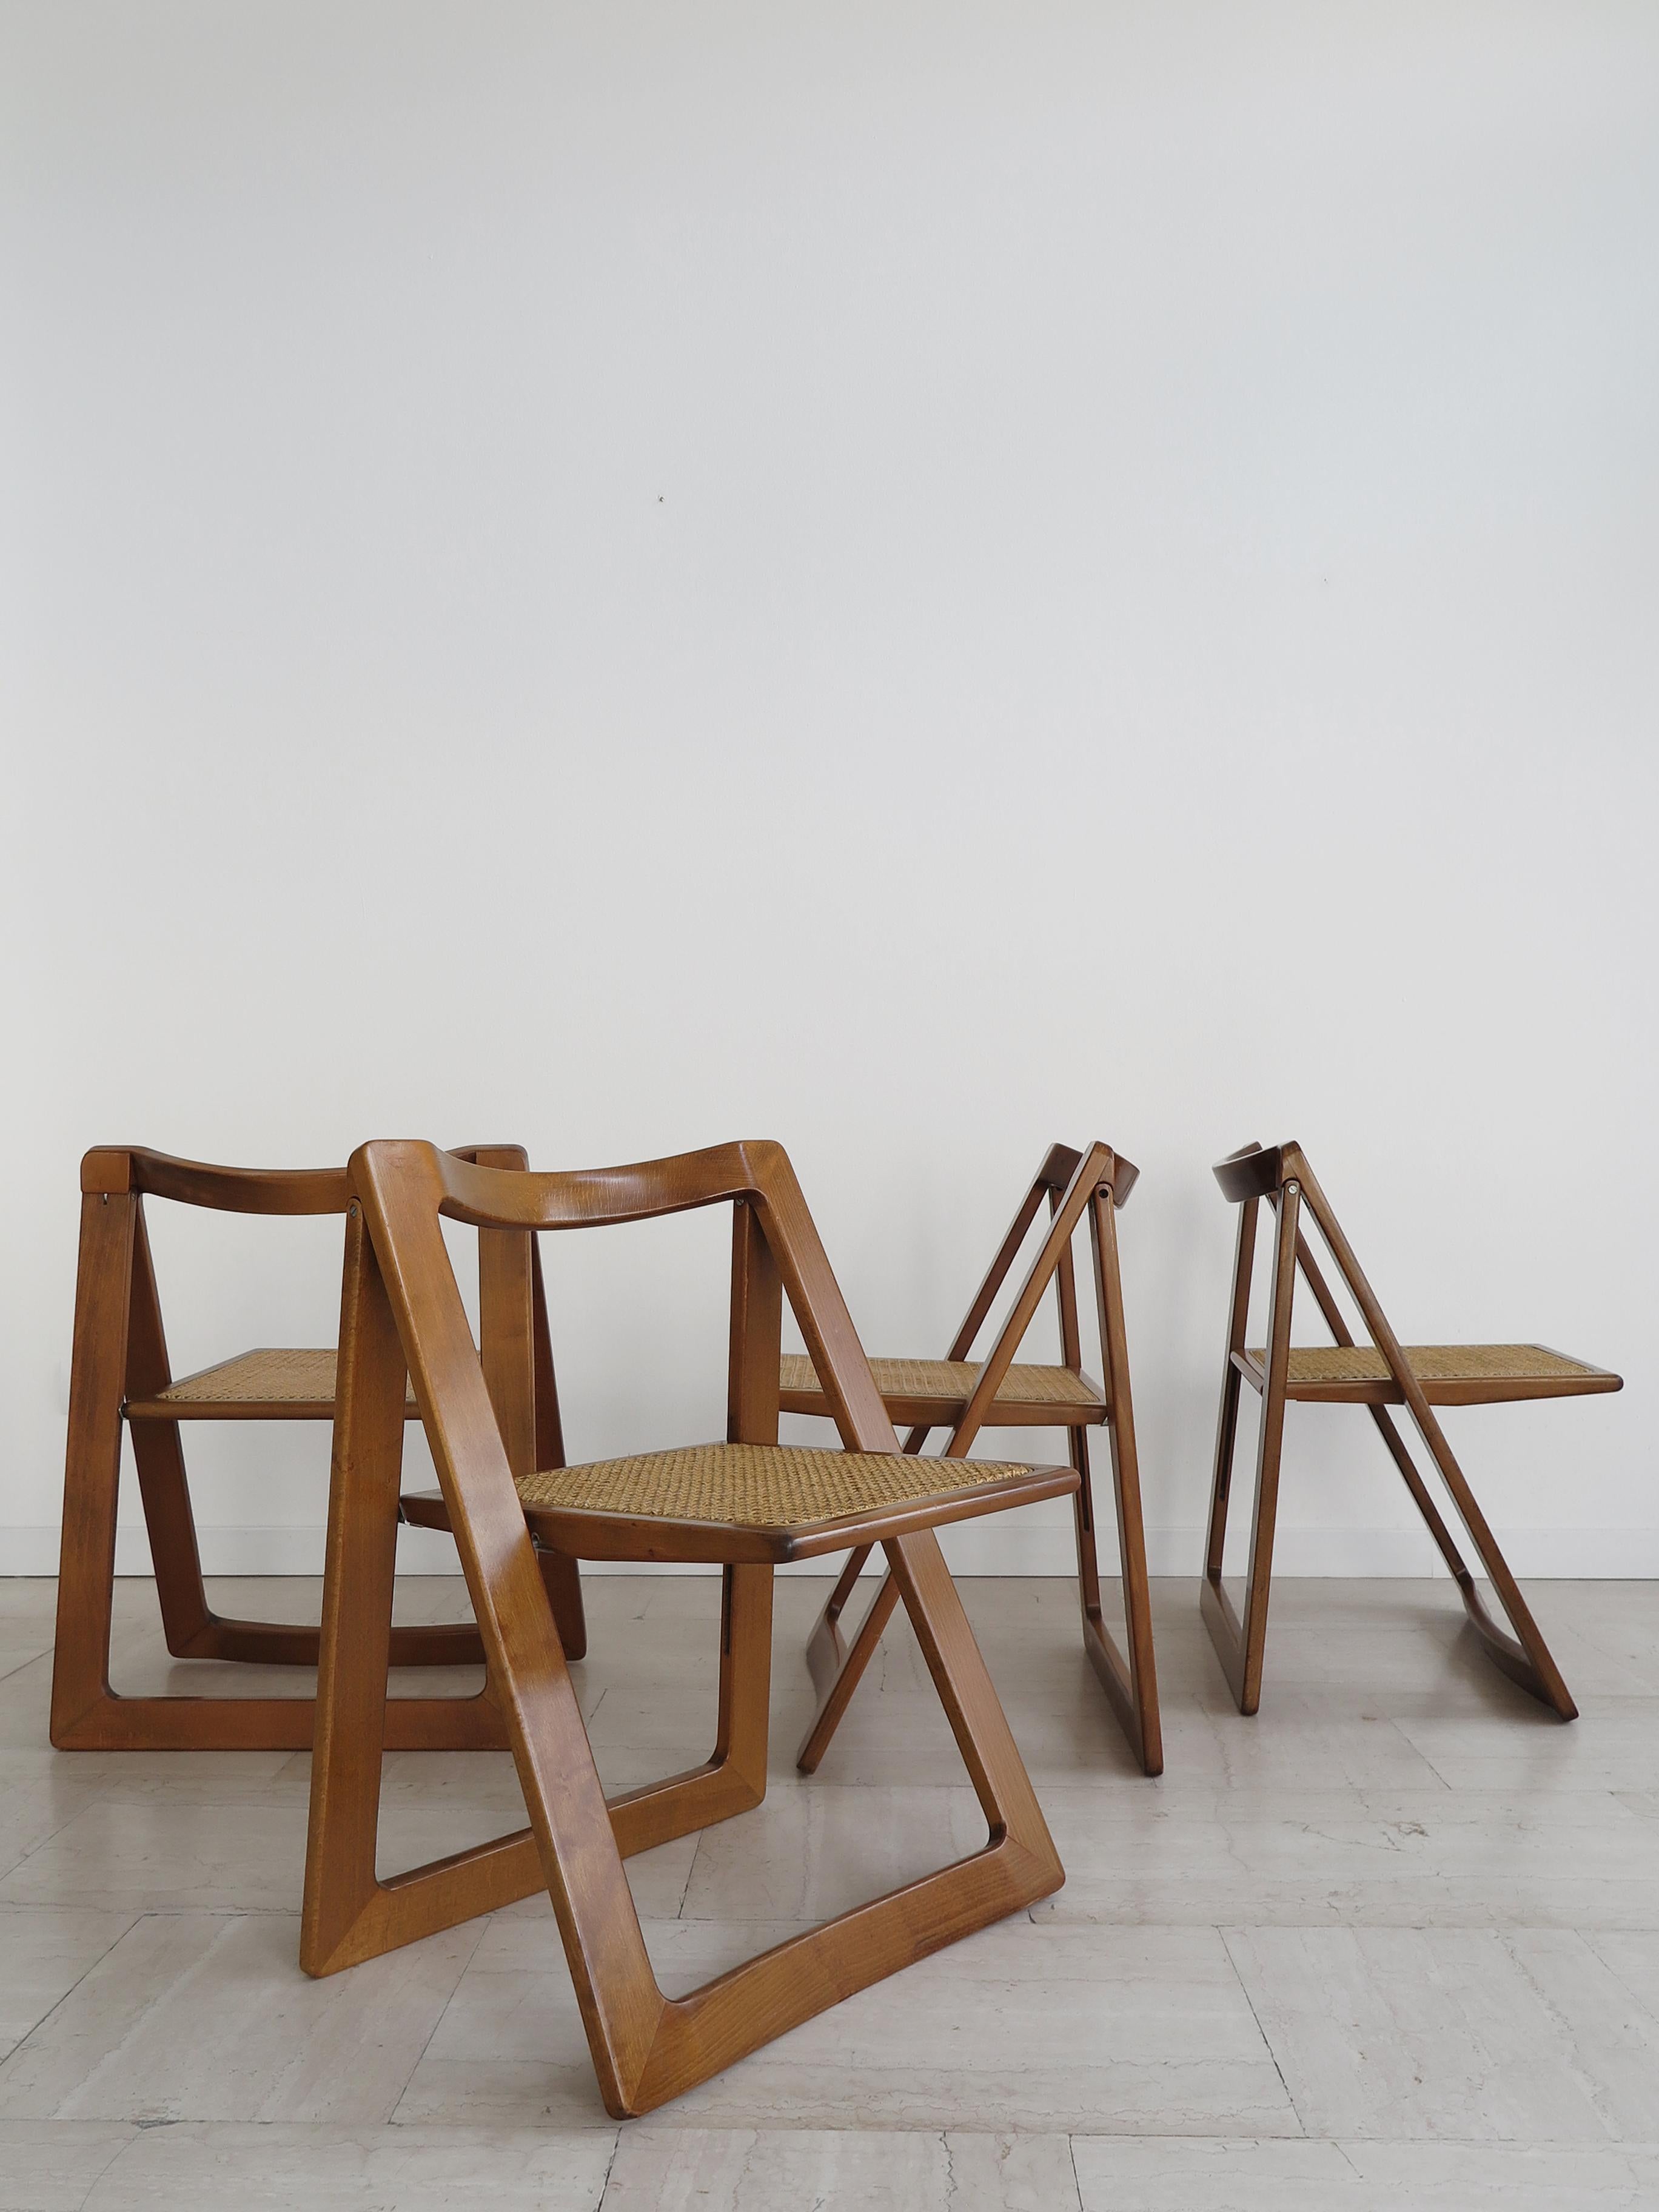 Set of four Italian Mid-Century Modern design folding dining chairs with tip-up seat model “Trieste” designed by Pierangela D’Aniello and Aldo Jacober and produced by Alberto Bazzini with seat in woven rattan cane and lacquered wood structure,